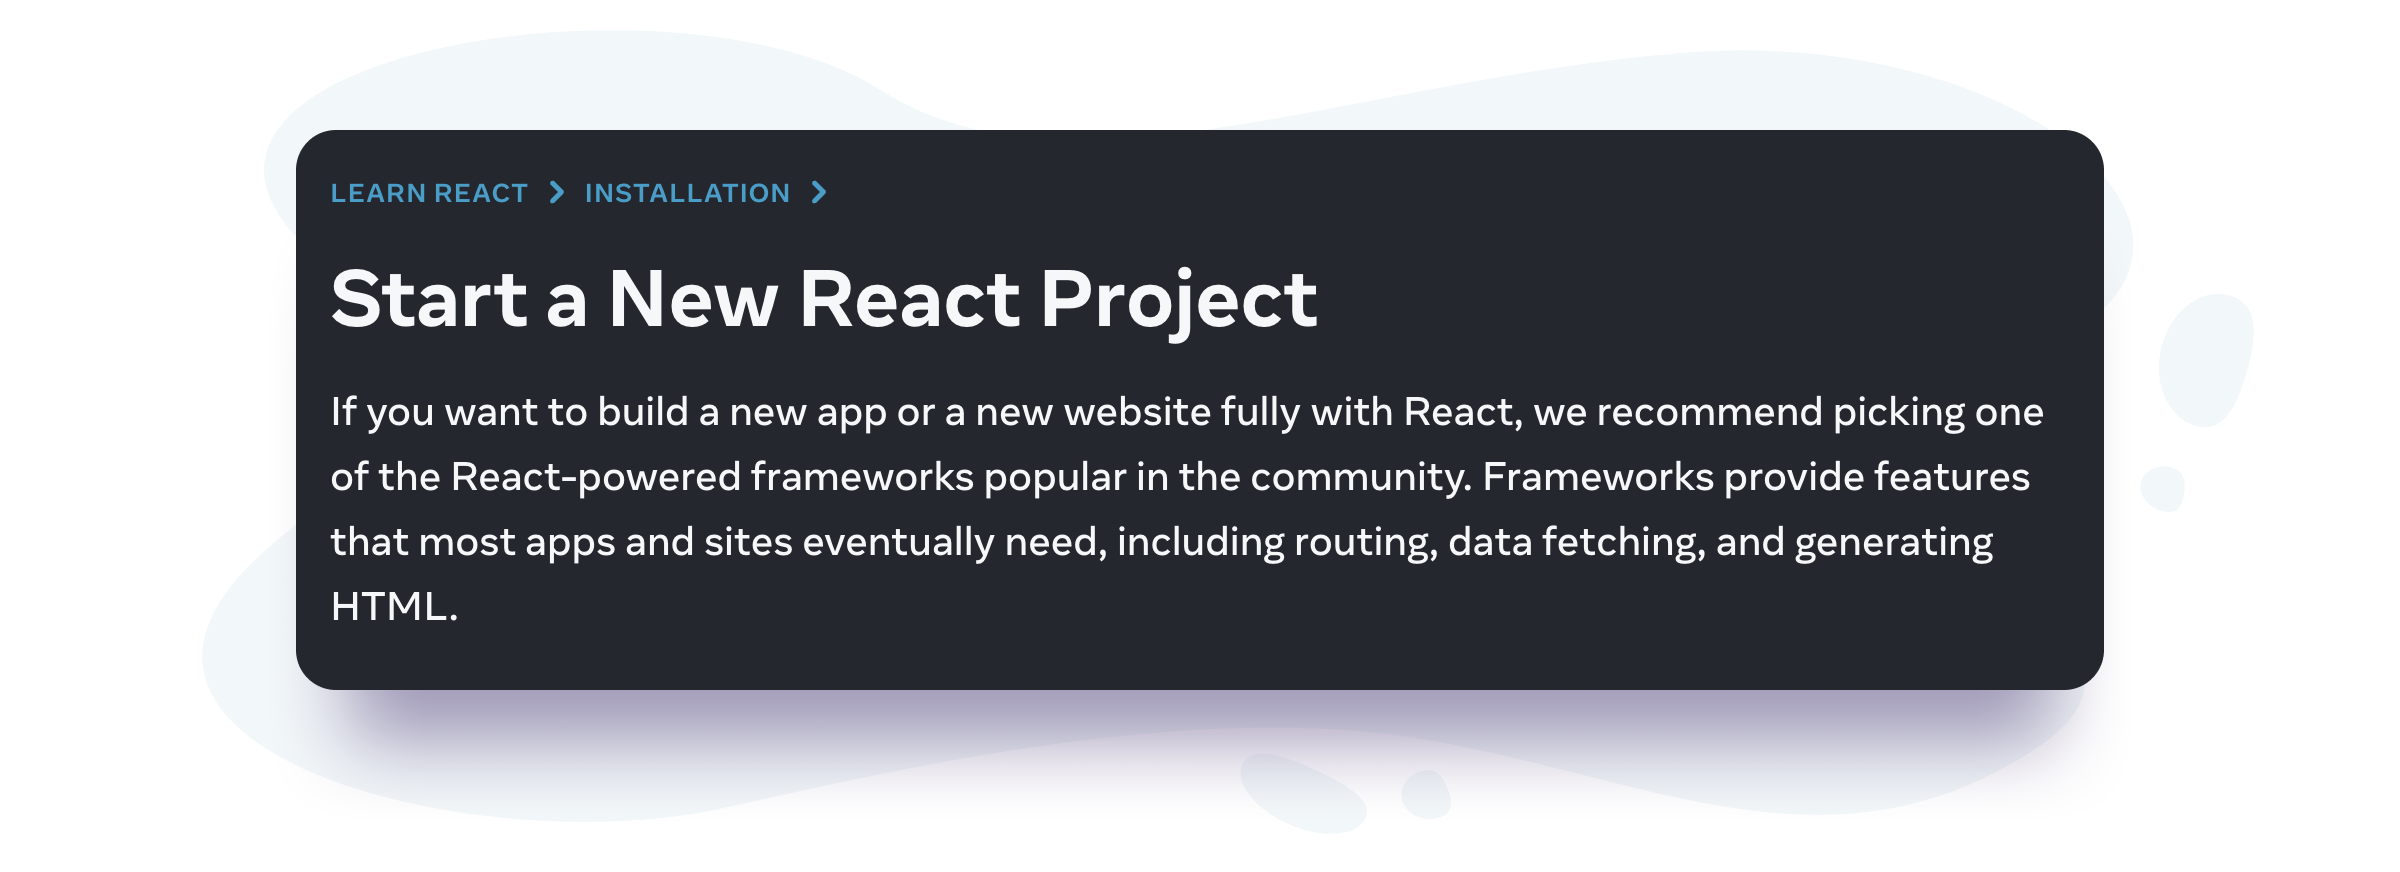 Start a new React project 